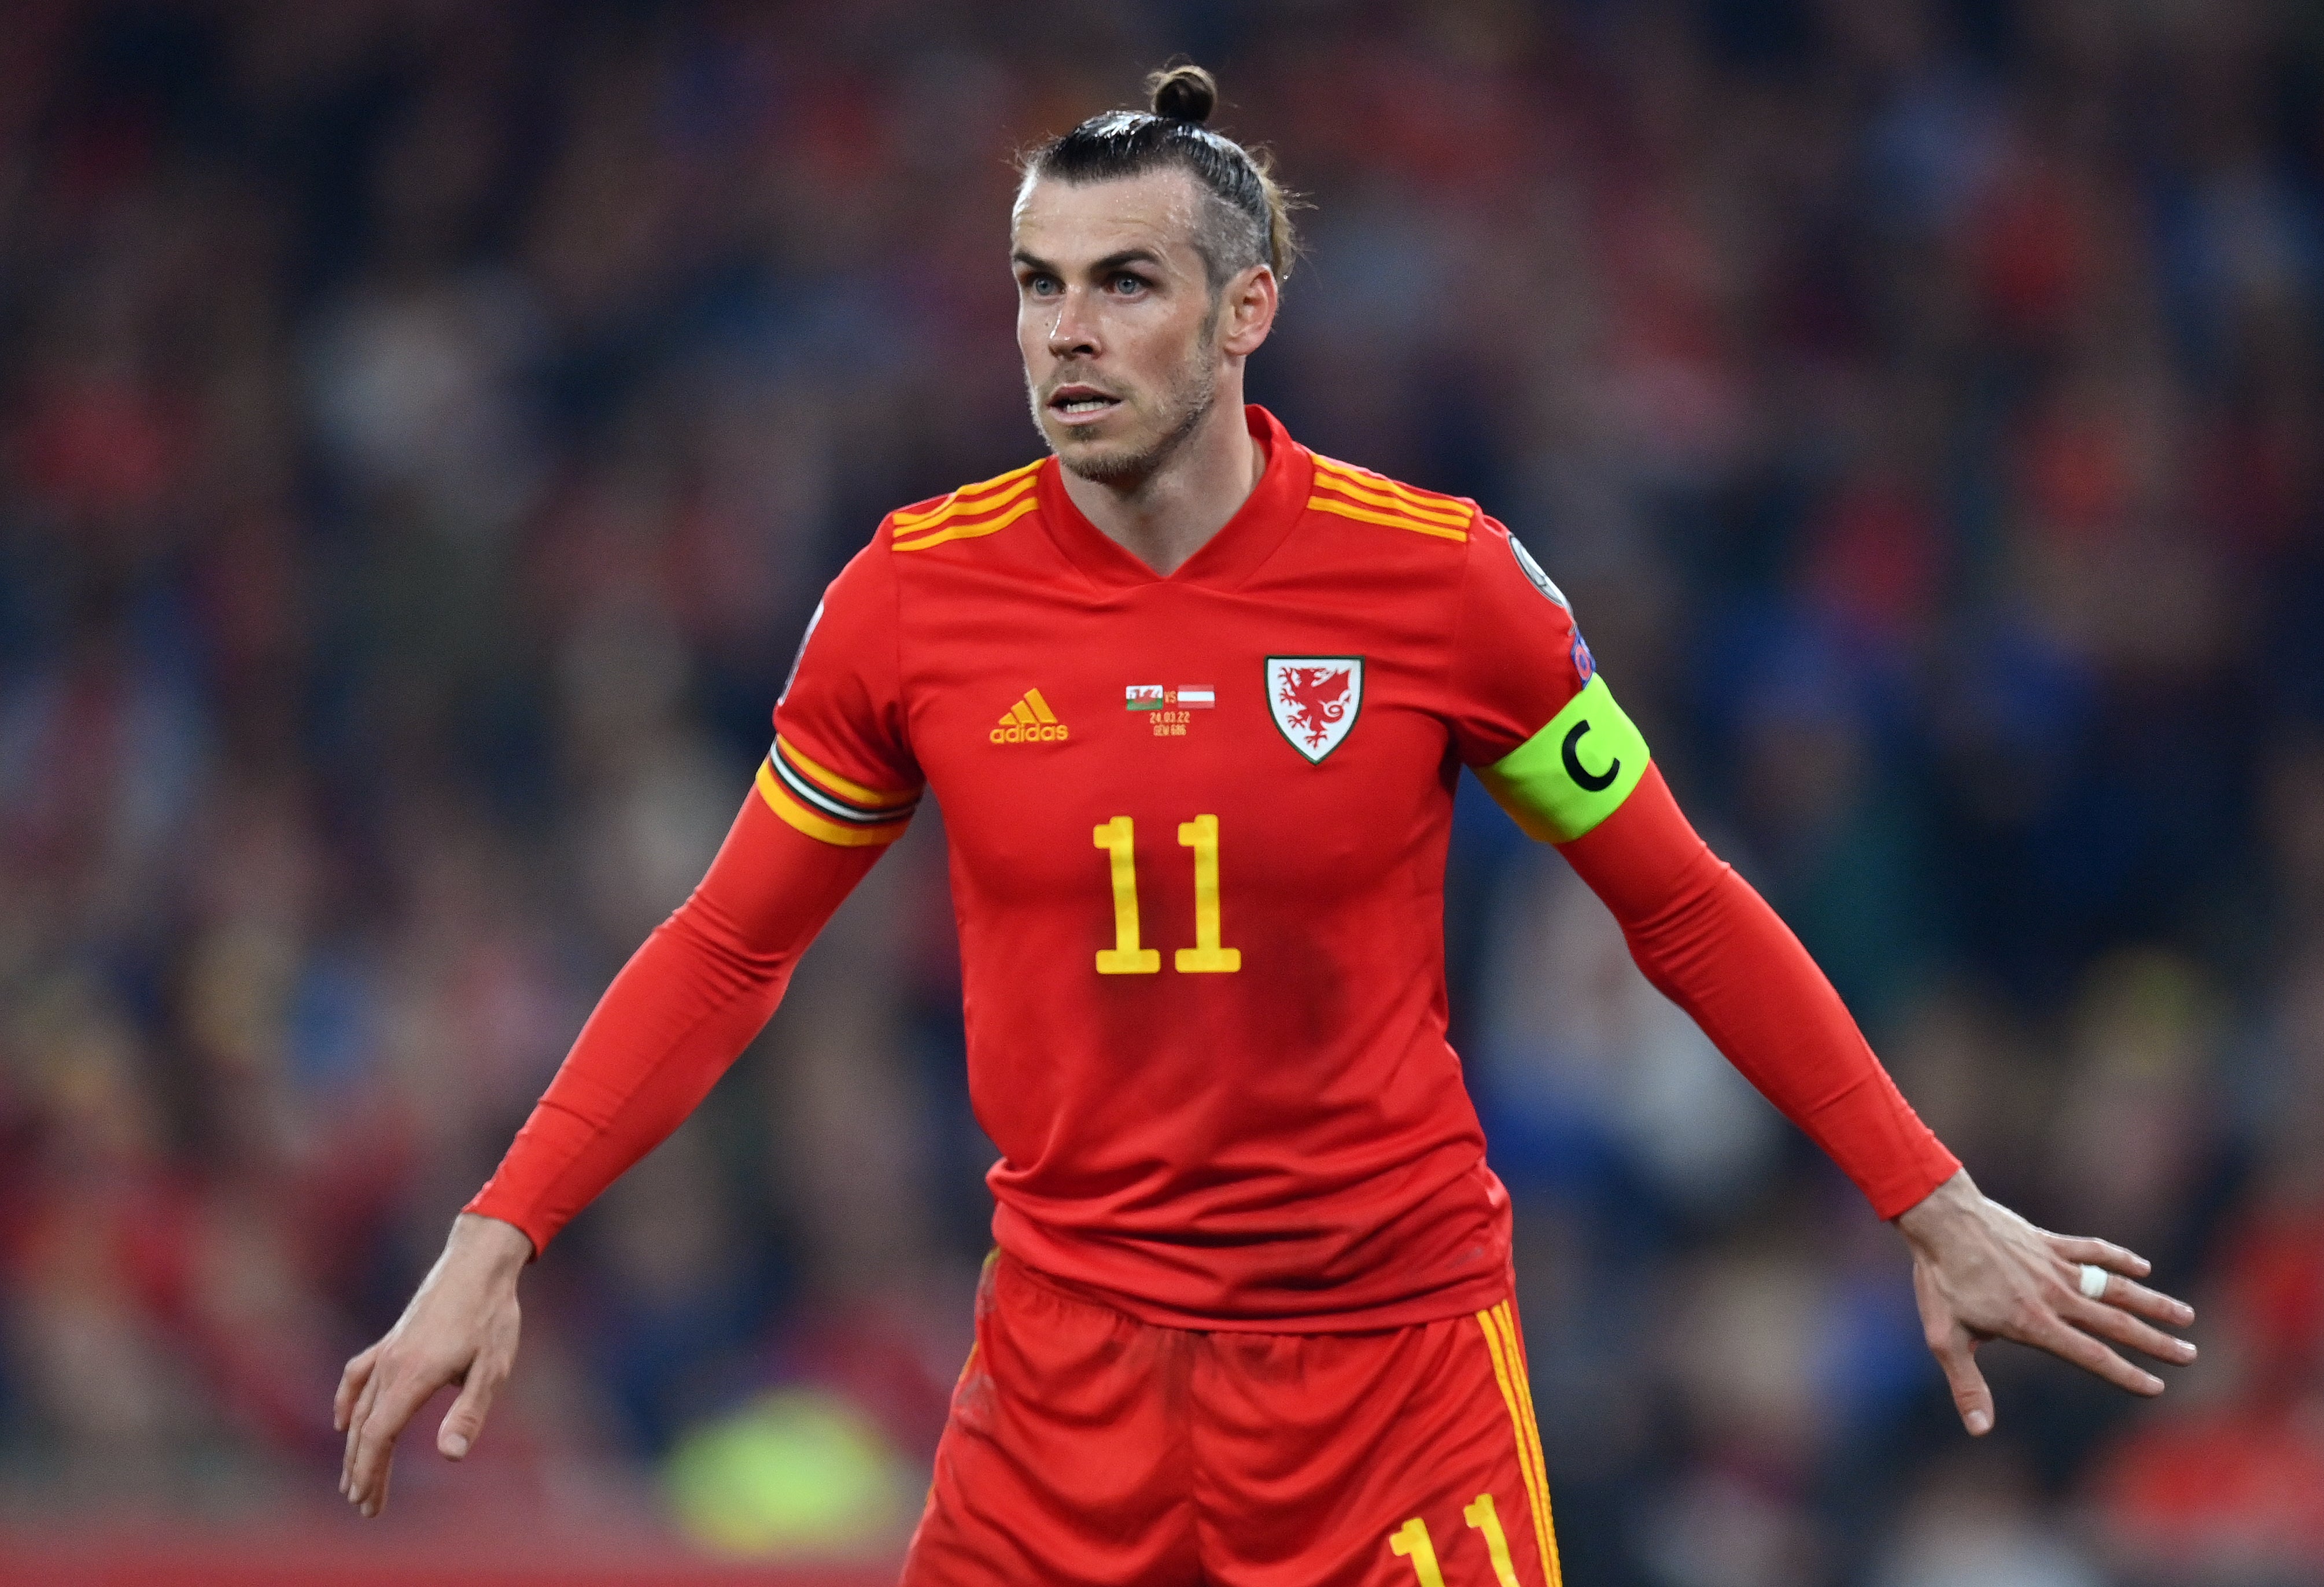 Gareth Bale will star for Wales